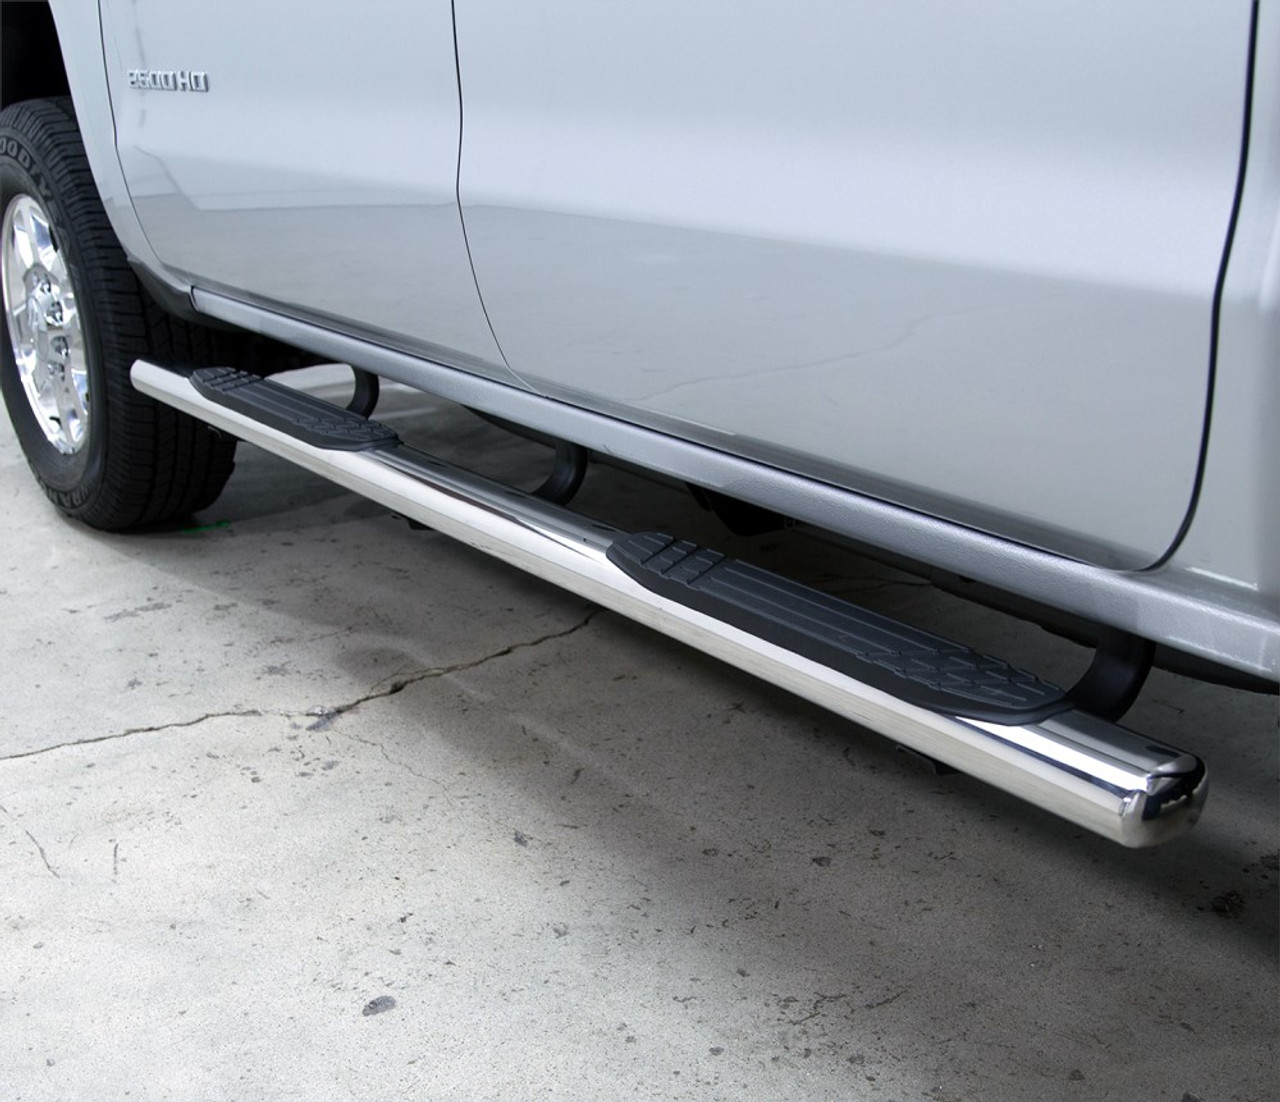 Go Rhino 684413367PS Ford, Escape, 2013 - 2015, 4 inch OE Xtreme - Complete Kit: Sidesteps + Brackets, Stainless steel, Polished, 640067PS side bars + 6841335 OE Xtreme Brackets. 4 inch wide x 67 inch long side bars. Welded end caps